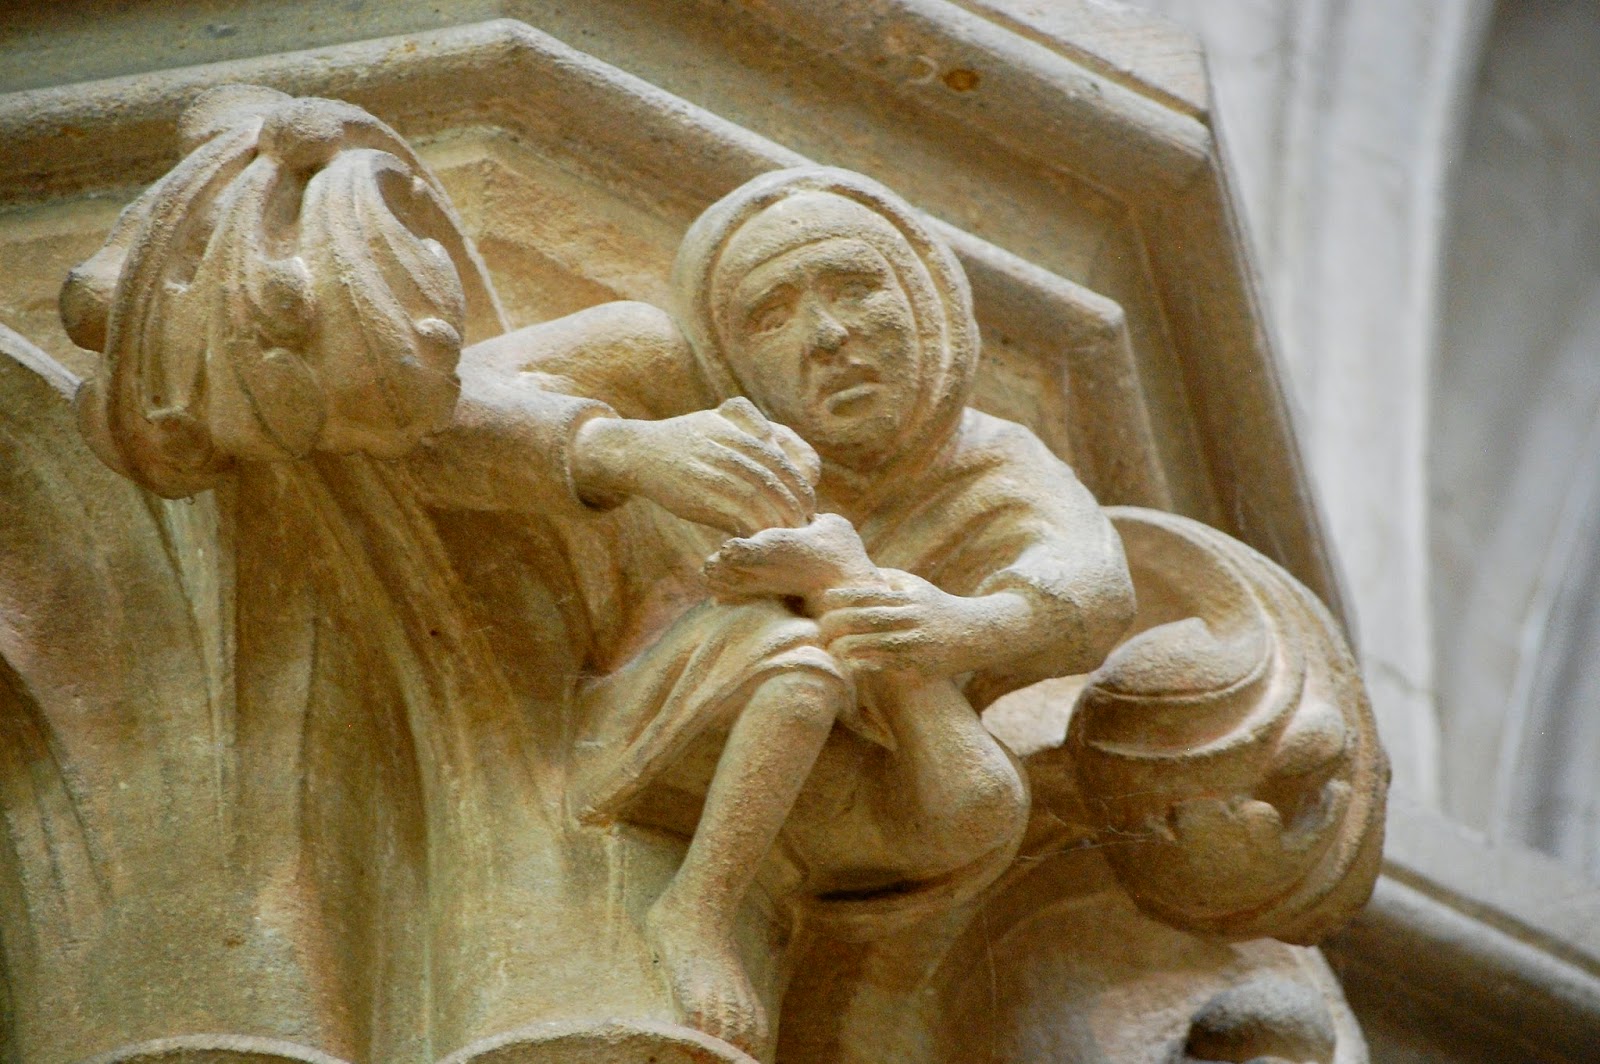 Carving of peasant with thorn in foot